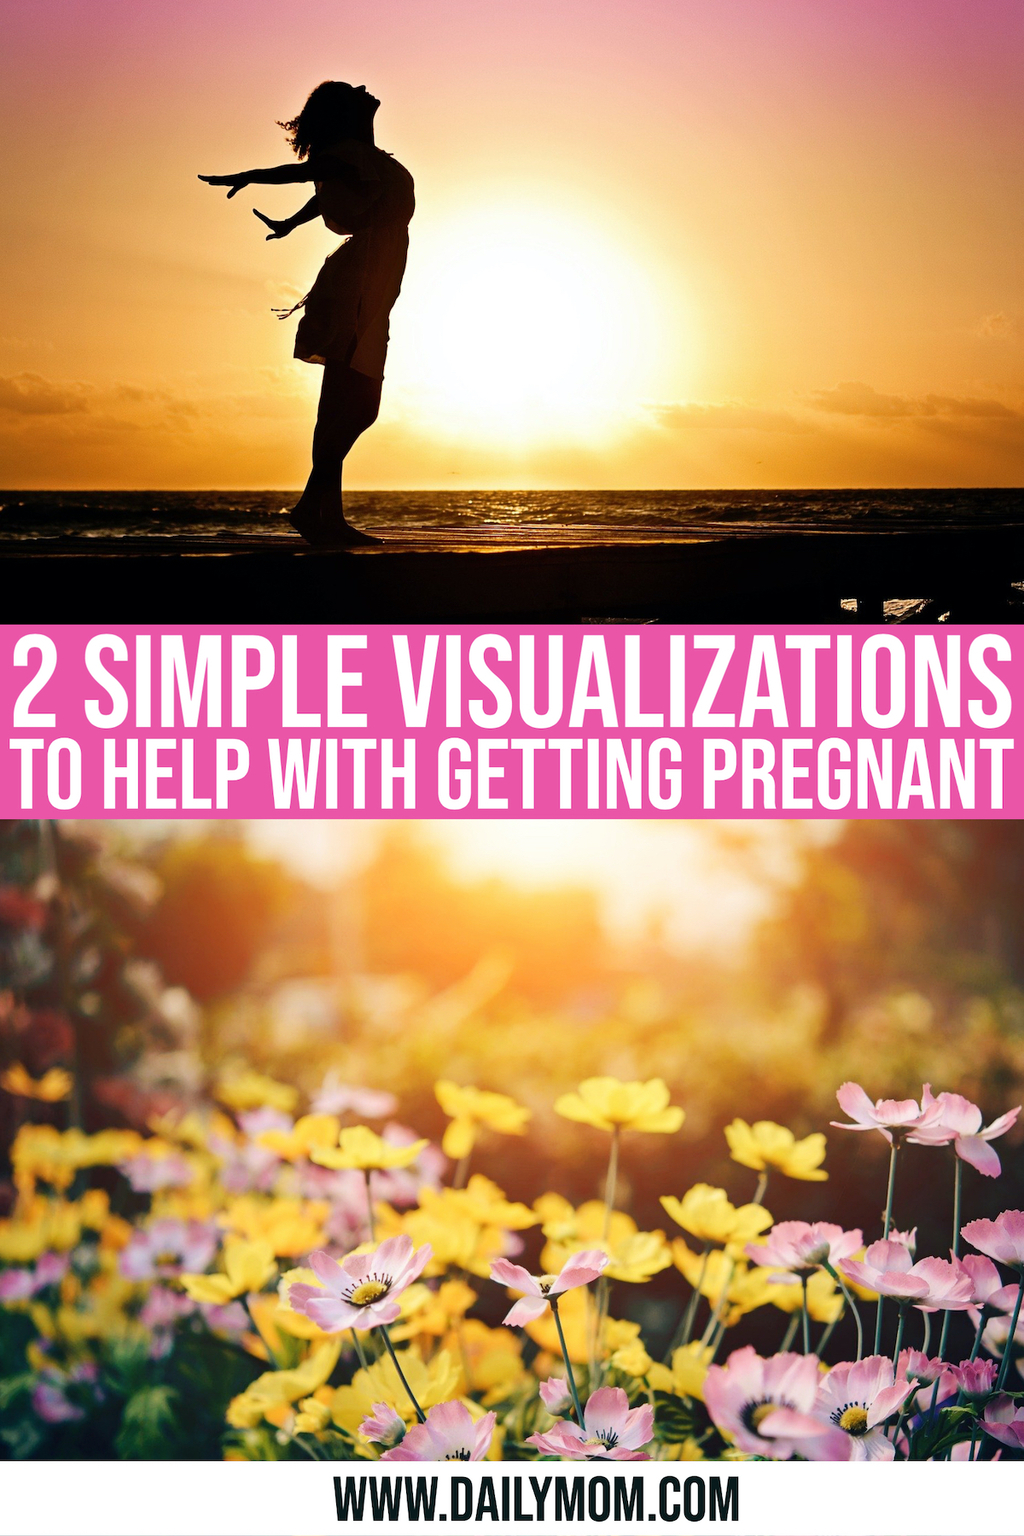 Getting Pregnant: 2 Simple Visualizations That May Help